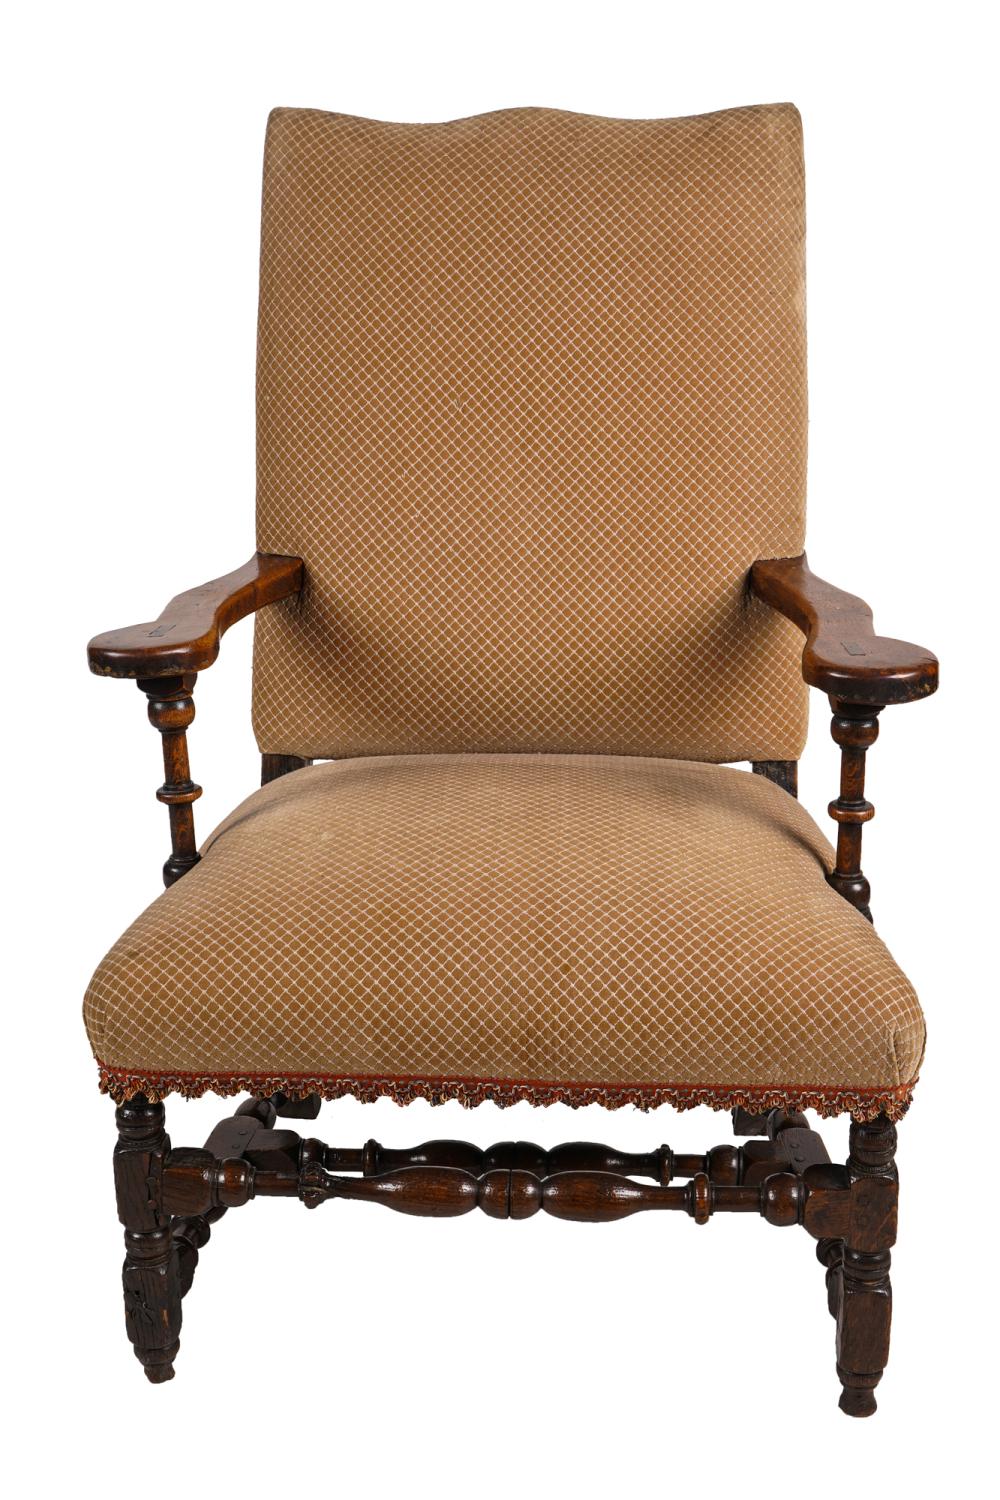 COUNTRY FRENCH FRUITWOOD ARMCHAIR27